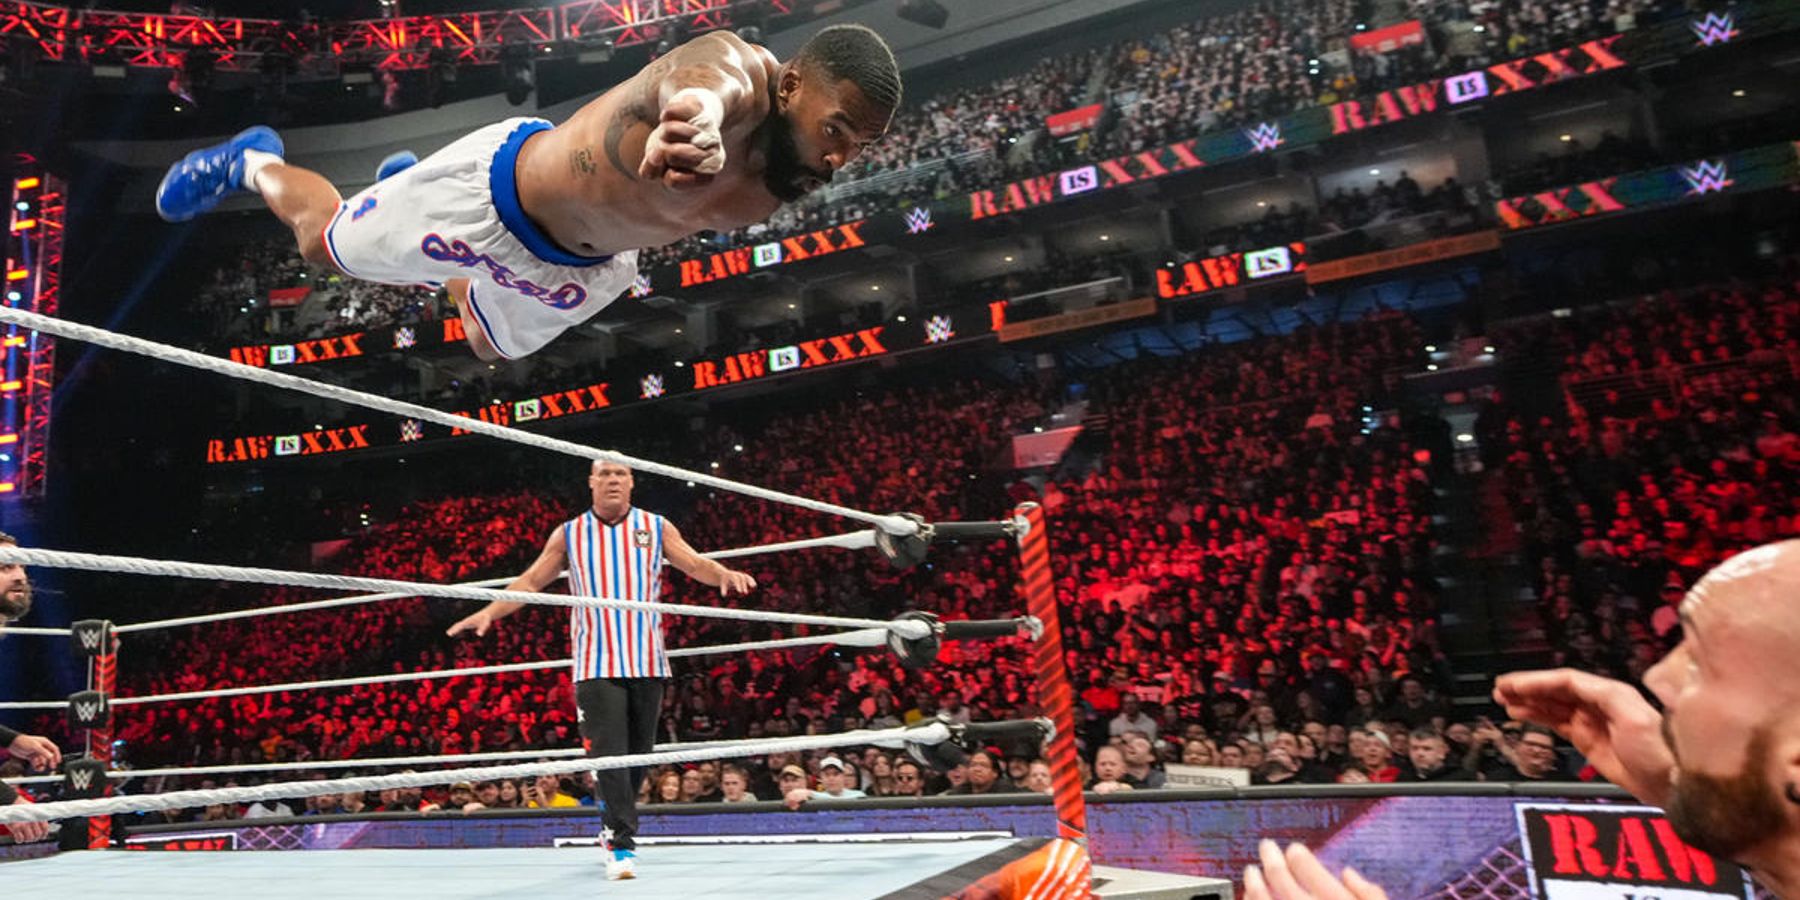 Montez Ford launches himself over the top rope during WWE's Raw is 30 episode in January 2023.